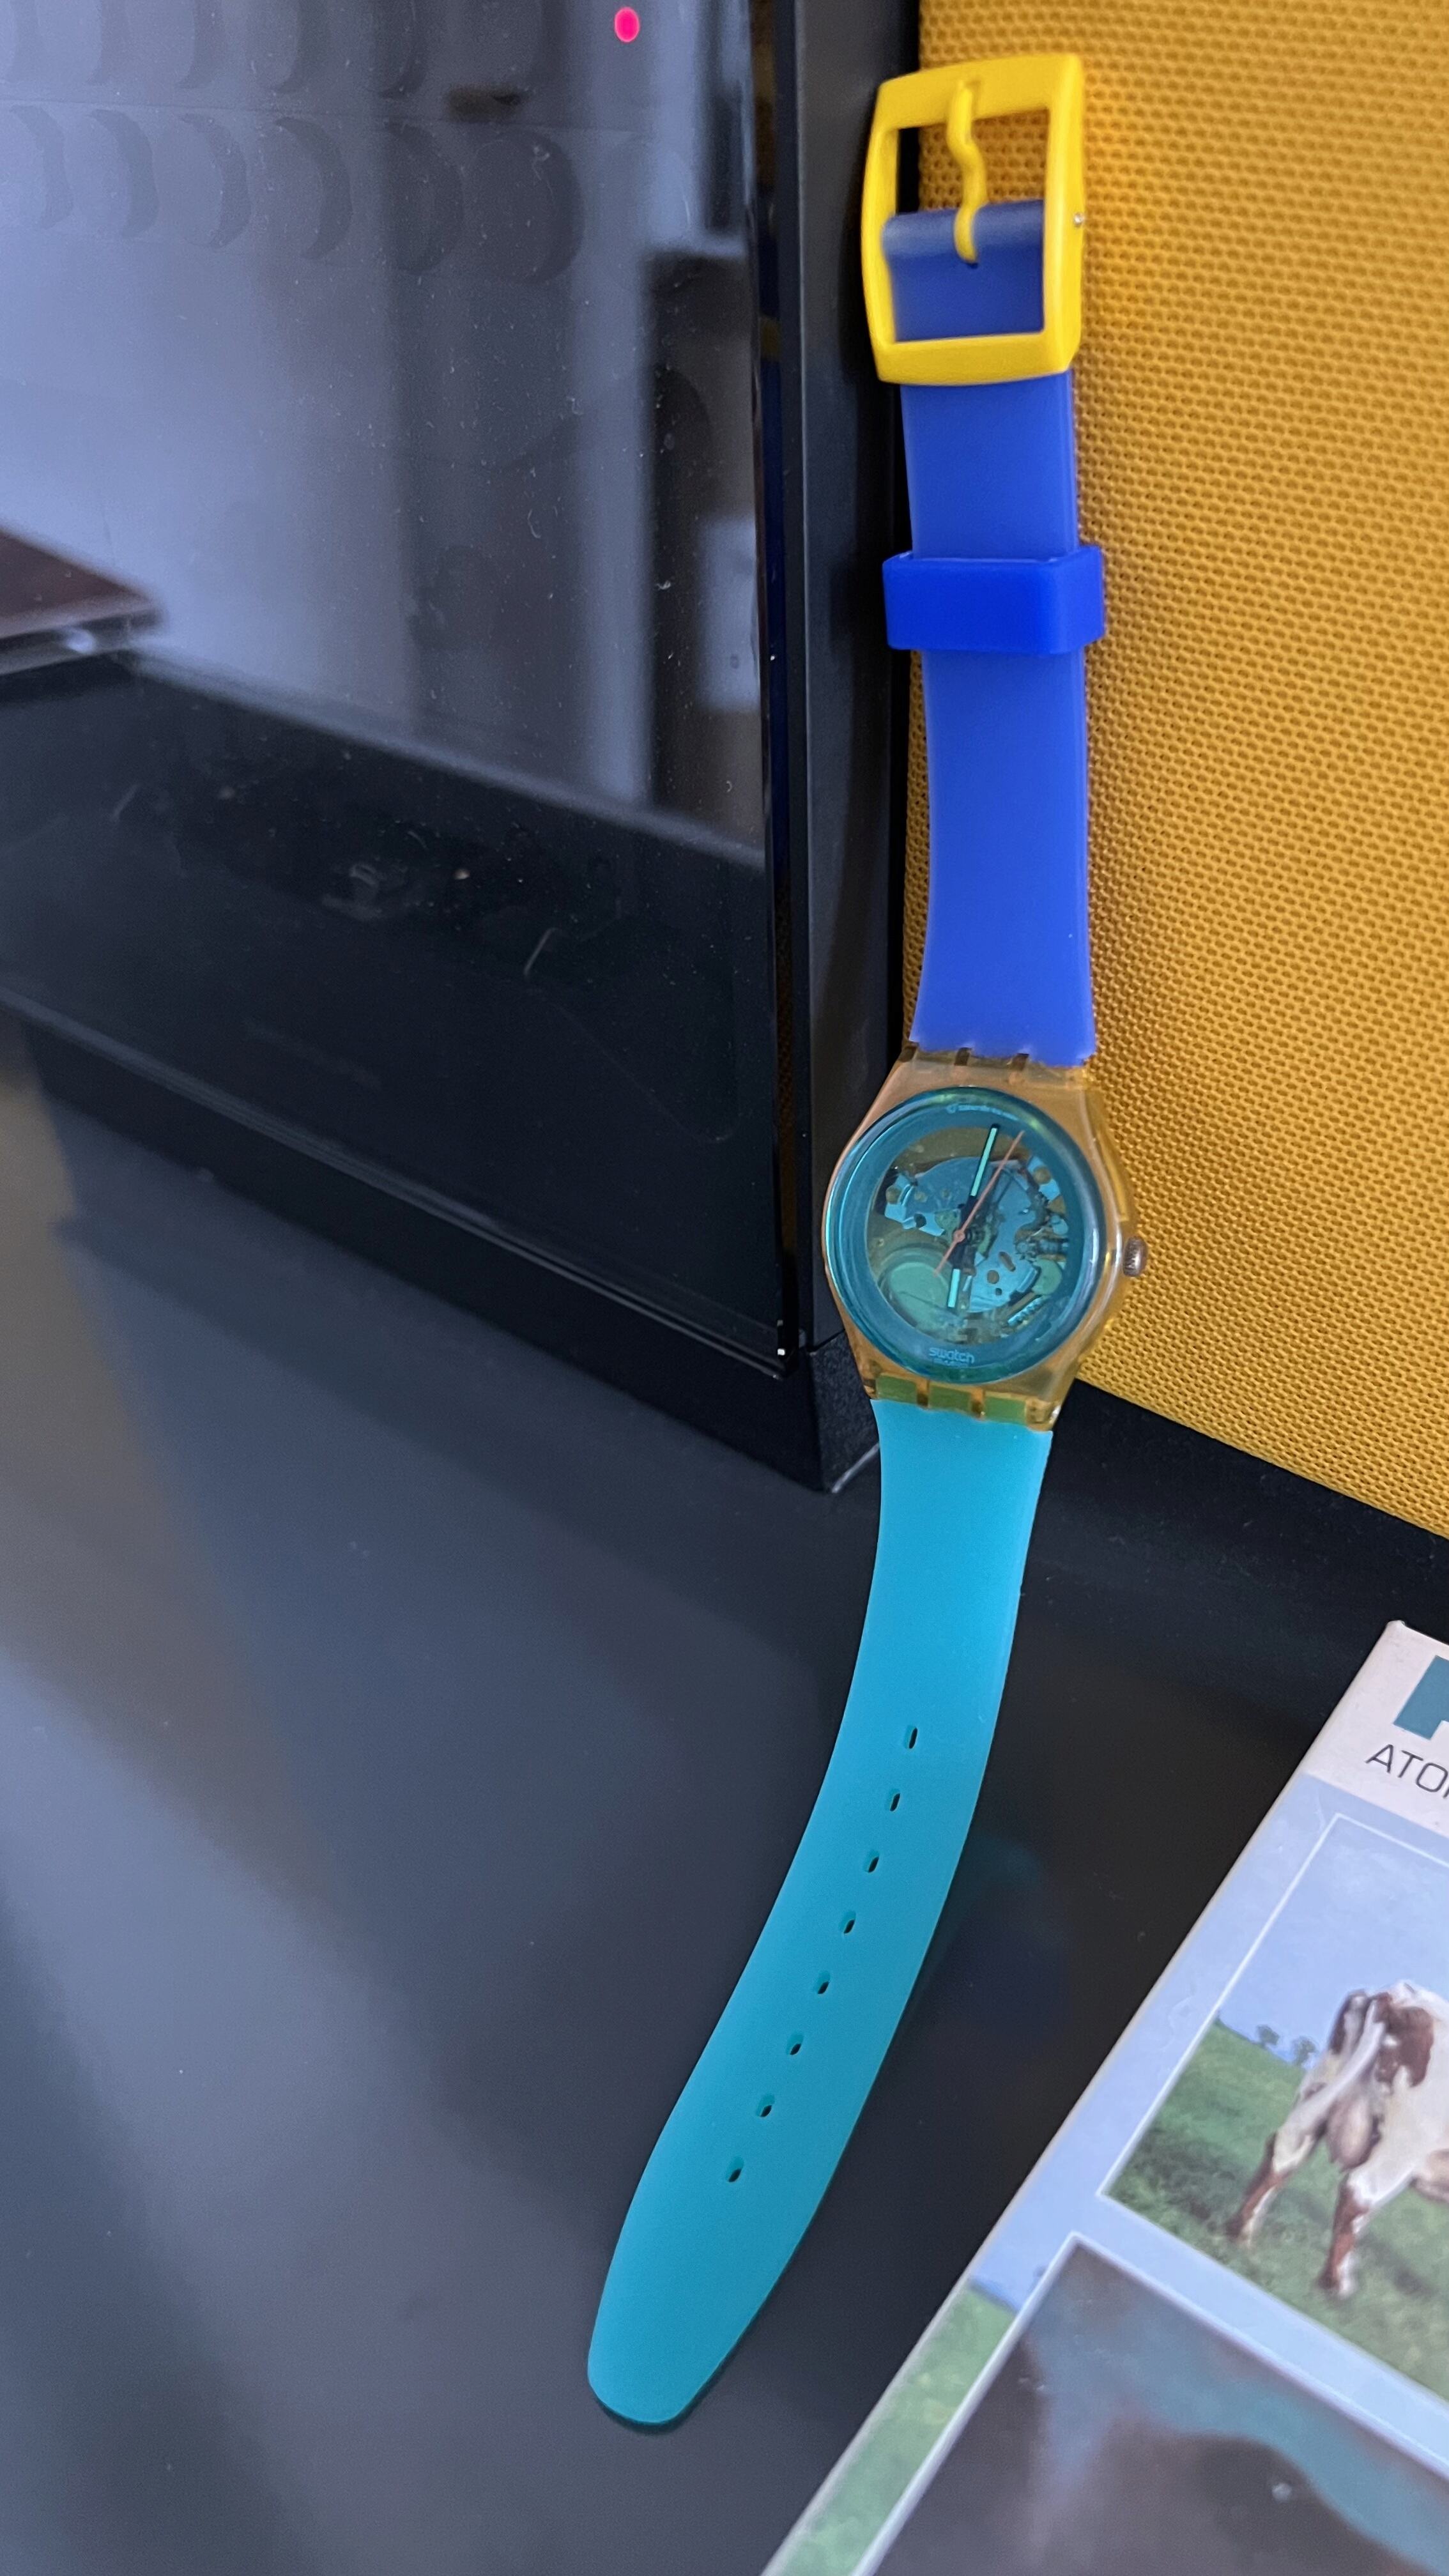 SWATCH, Vraiment jetable? - Page 2 Img_5814